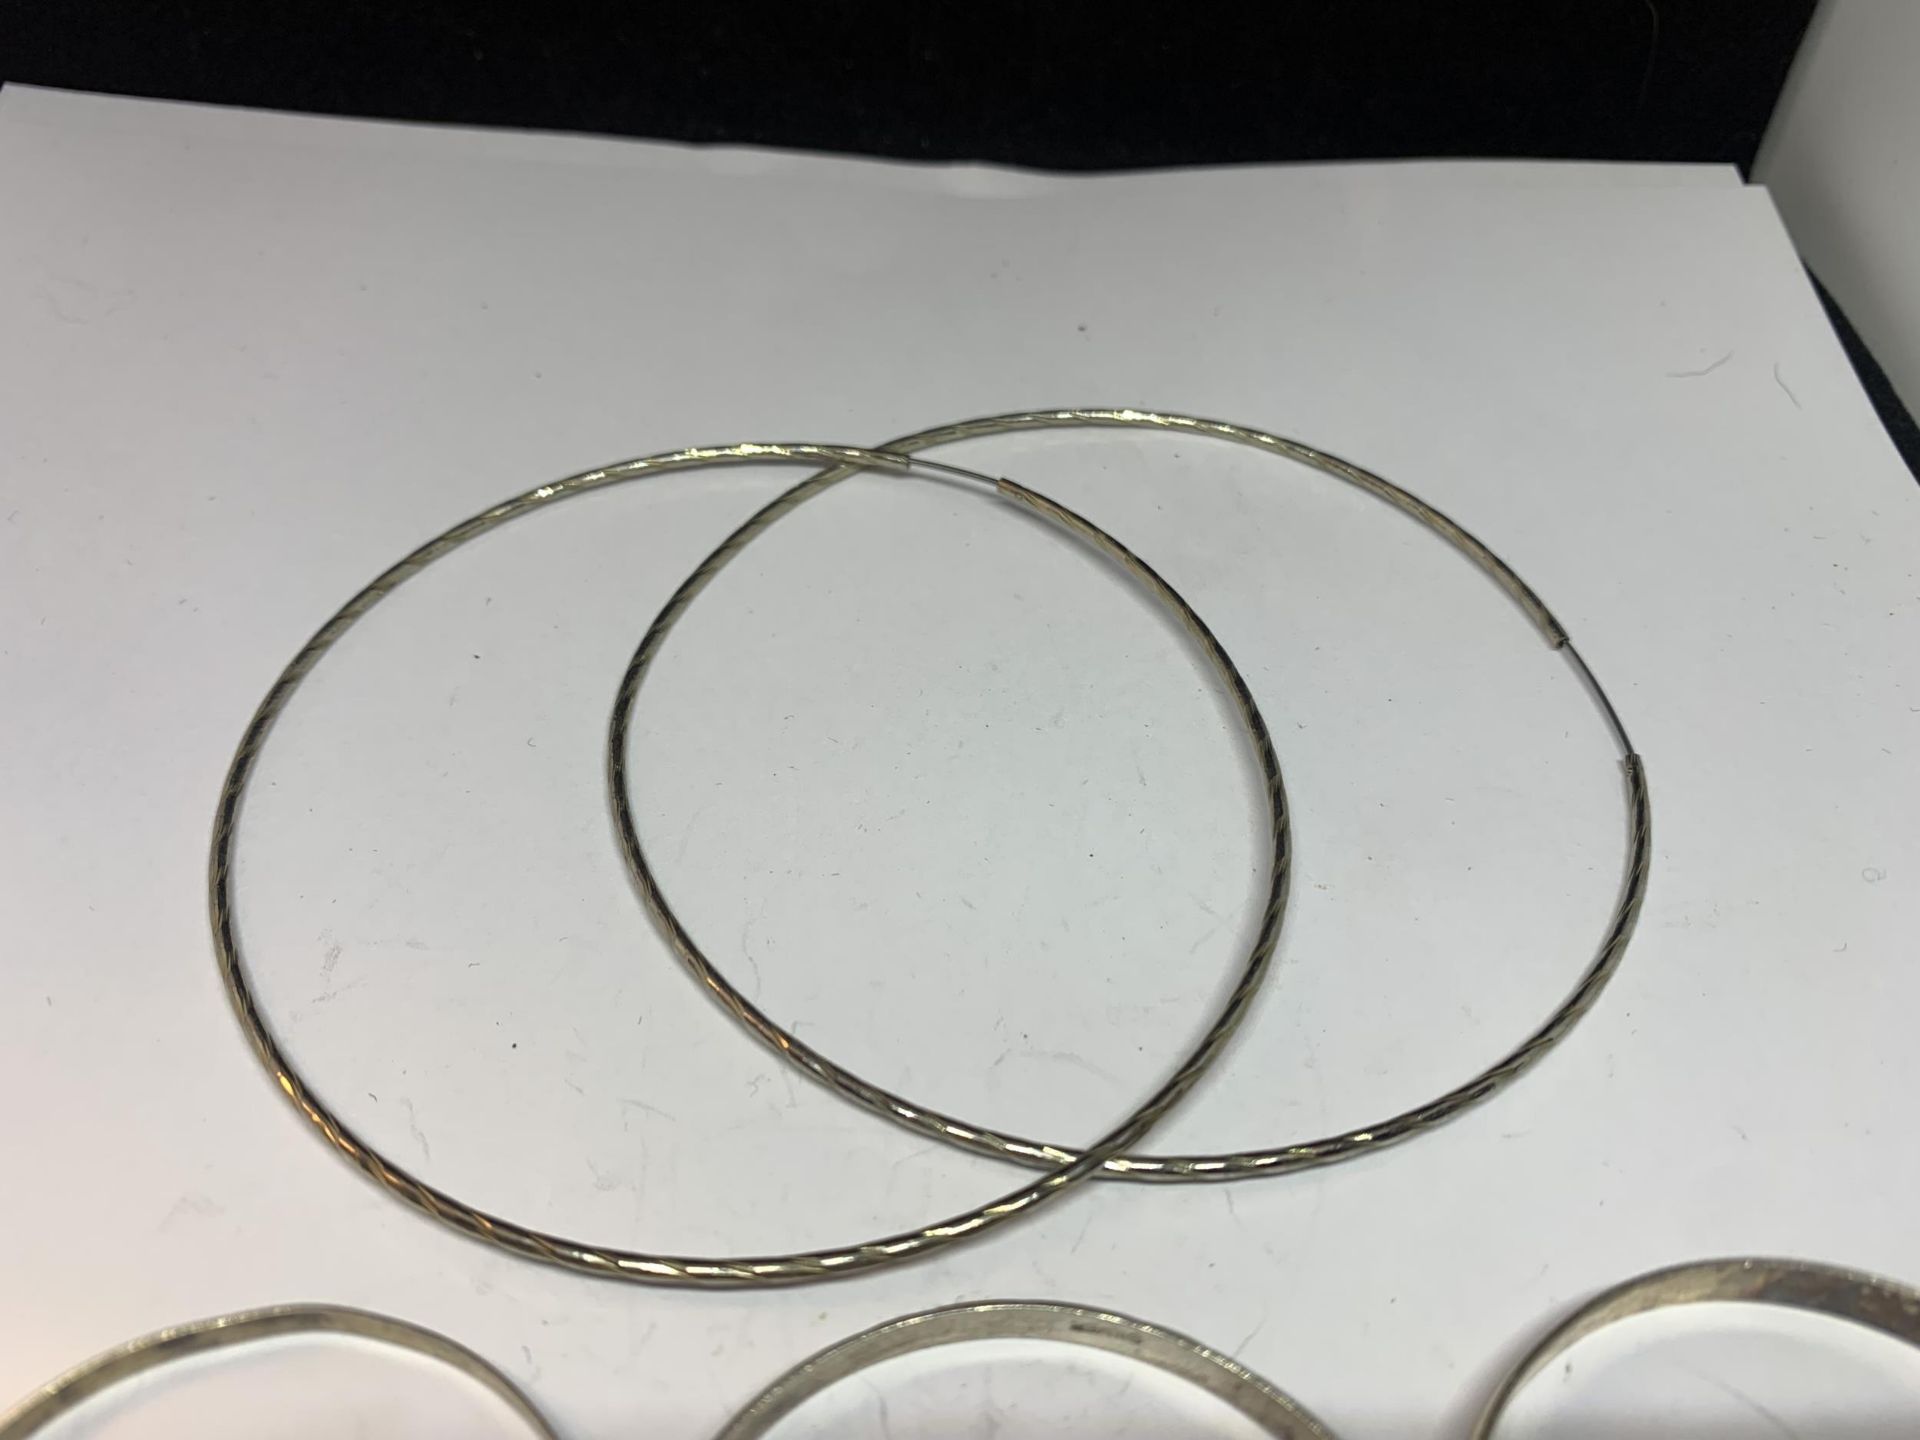 THREE SILVER CHILDRENS BANGLES AND A PAIR OF LARGE EARRINGS - Image 3 of 3